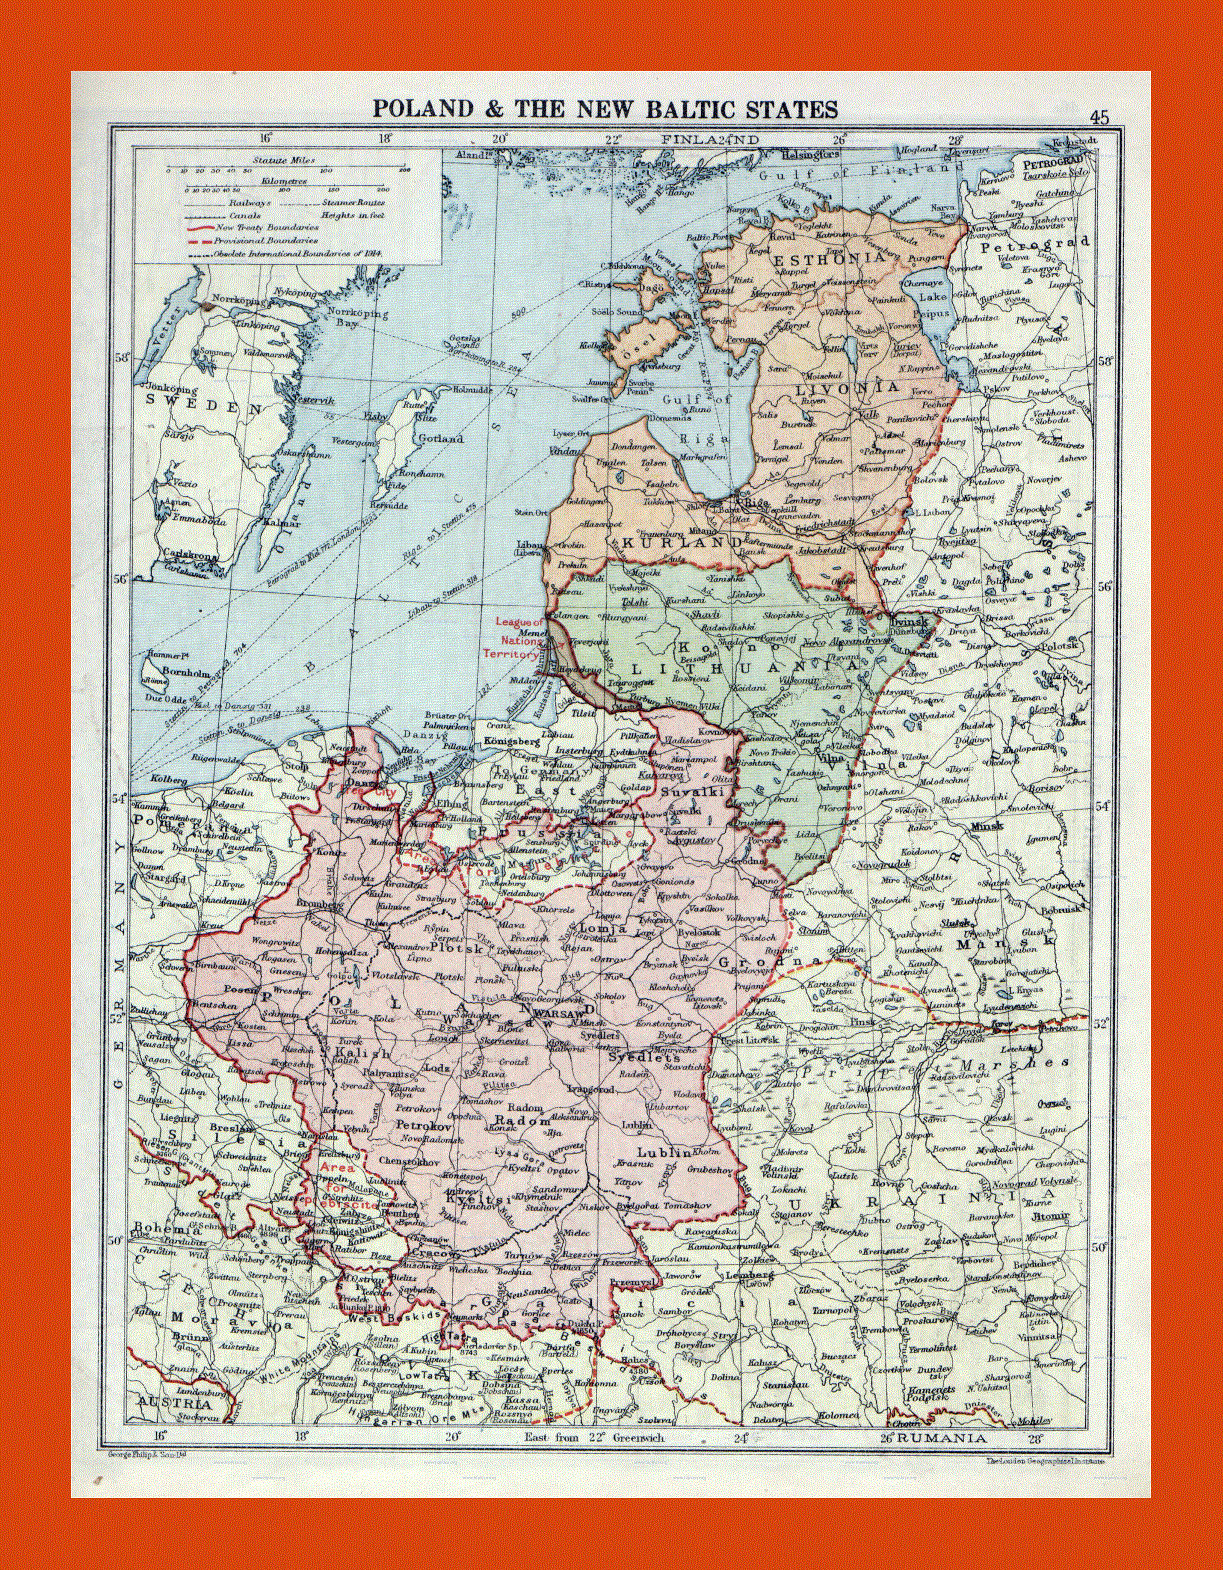 Old map of Poland and Baltic States - 1920